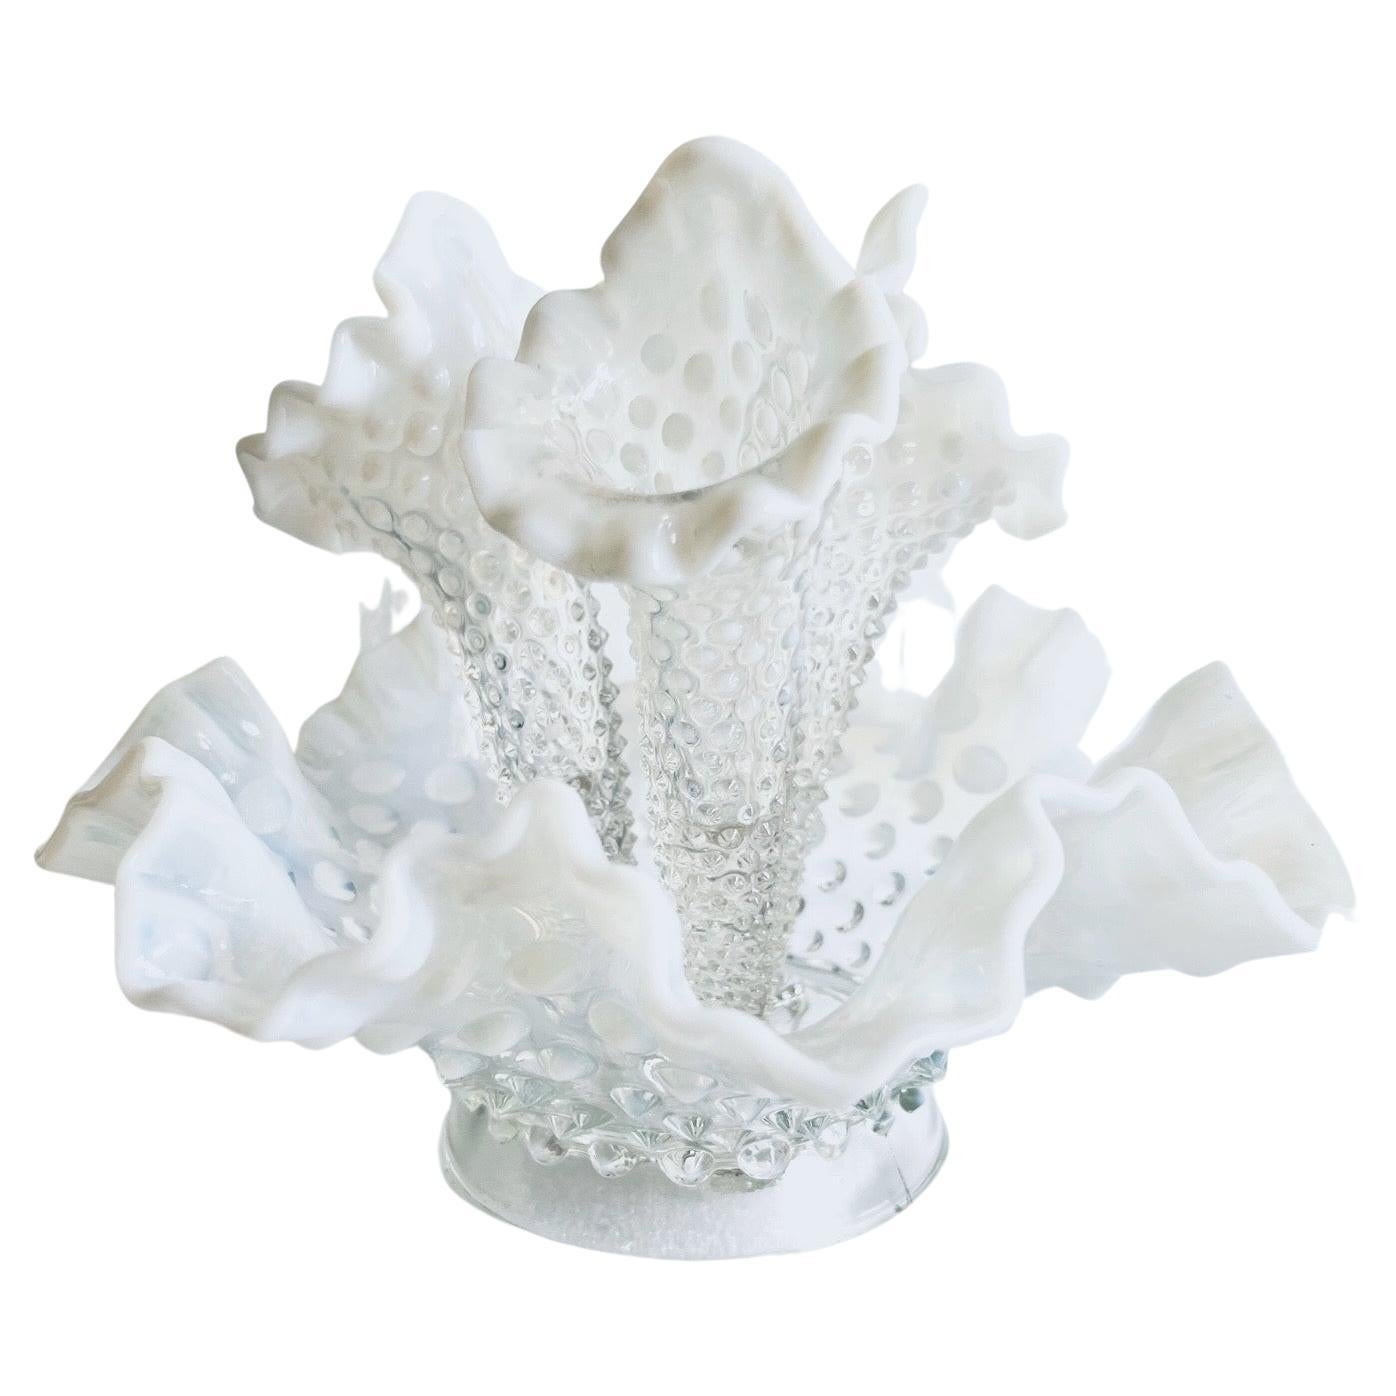 White Opaline Blown Glass Epergne Vase with Hobnail Design, c. 1950's